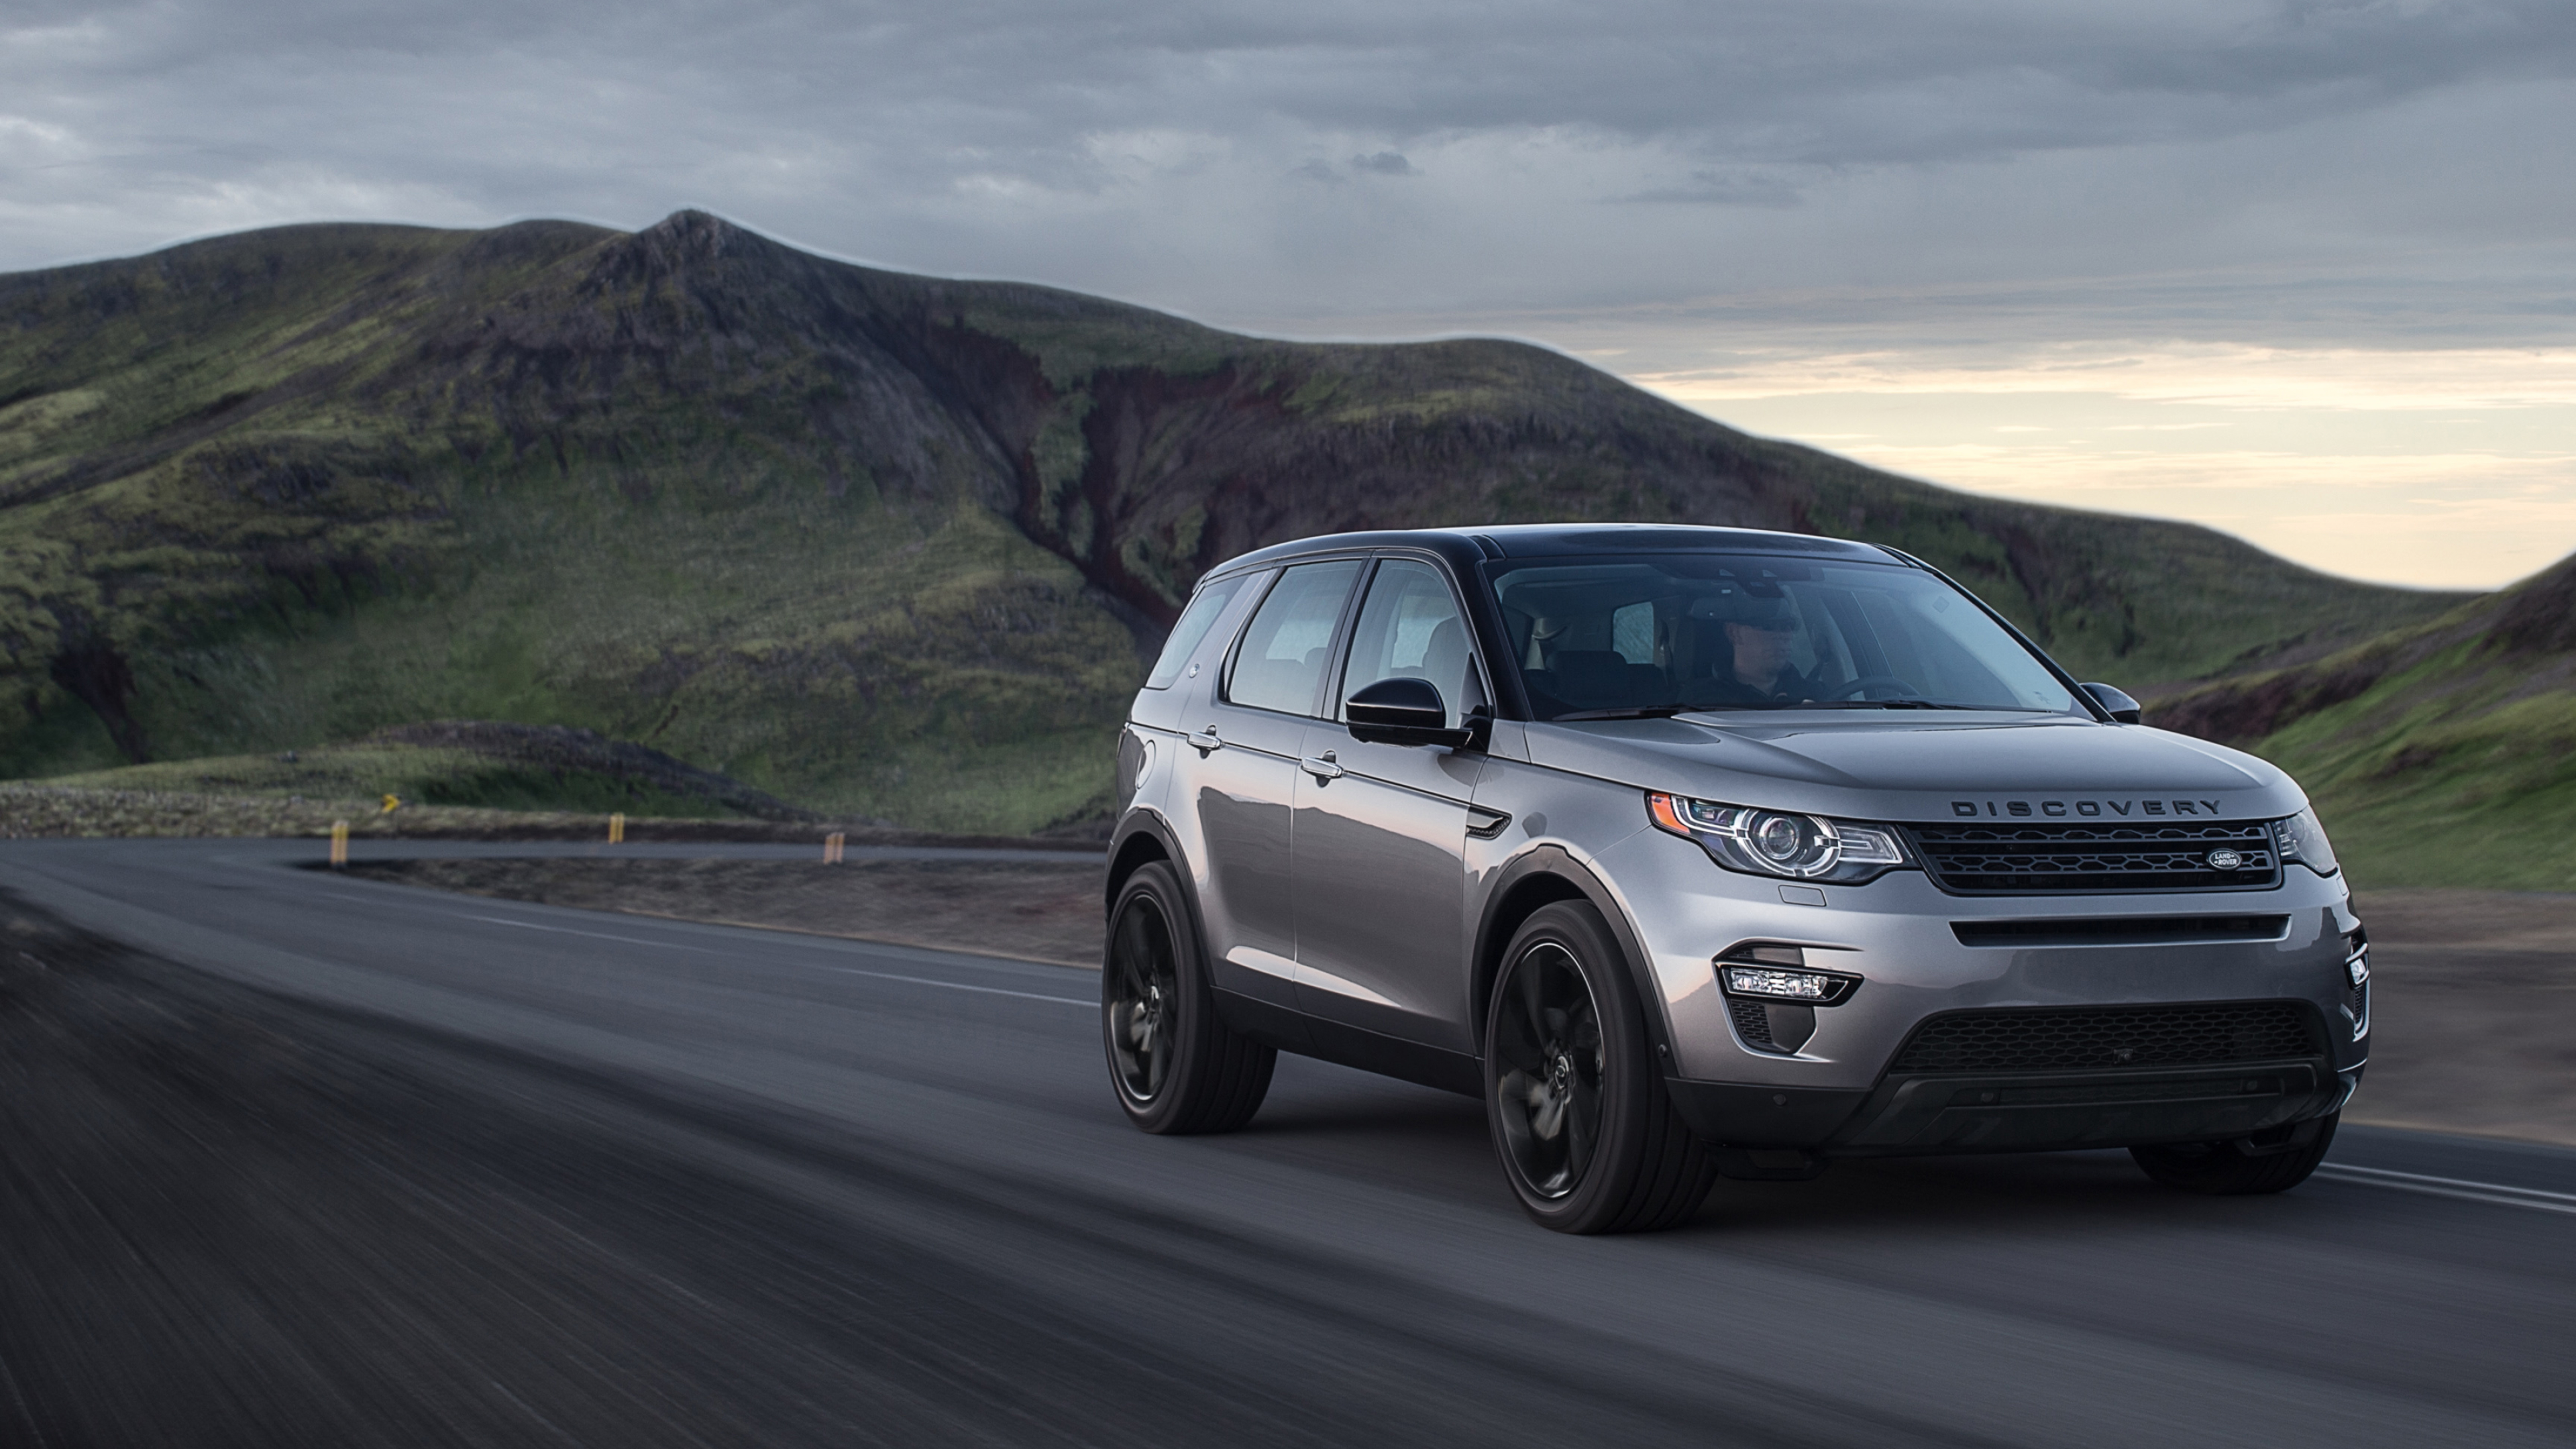 Land Rover Discovery, SUV model, Discovery Sport, Rugged elegance, 3840x2160 4K Desktop